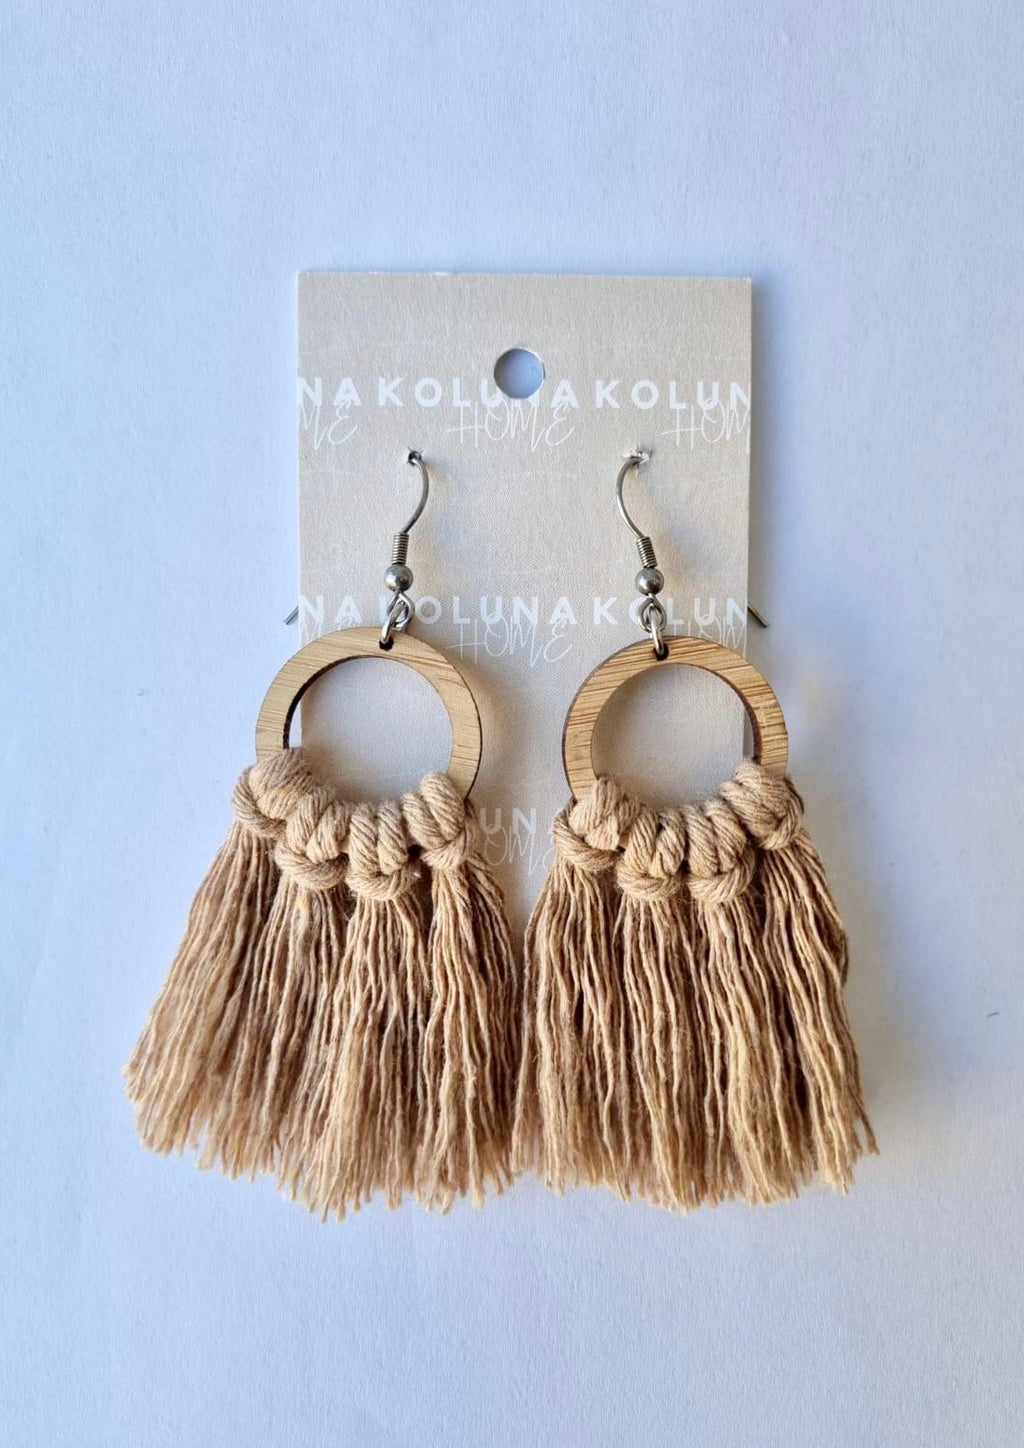 Circle Bamboo Earrings - Light Brown  The Earrings that go with everything! And look gorgeous with our matching Macrame clutch/cross body bags.  Details and materials:  Circle shape lightweight bamboo frame  Rope is 100% Recycled Cotton Hooks are surgical steel  Handmade in NZ